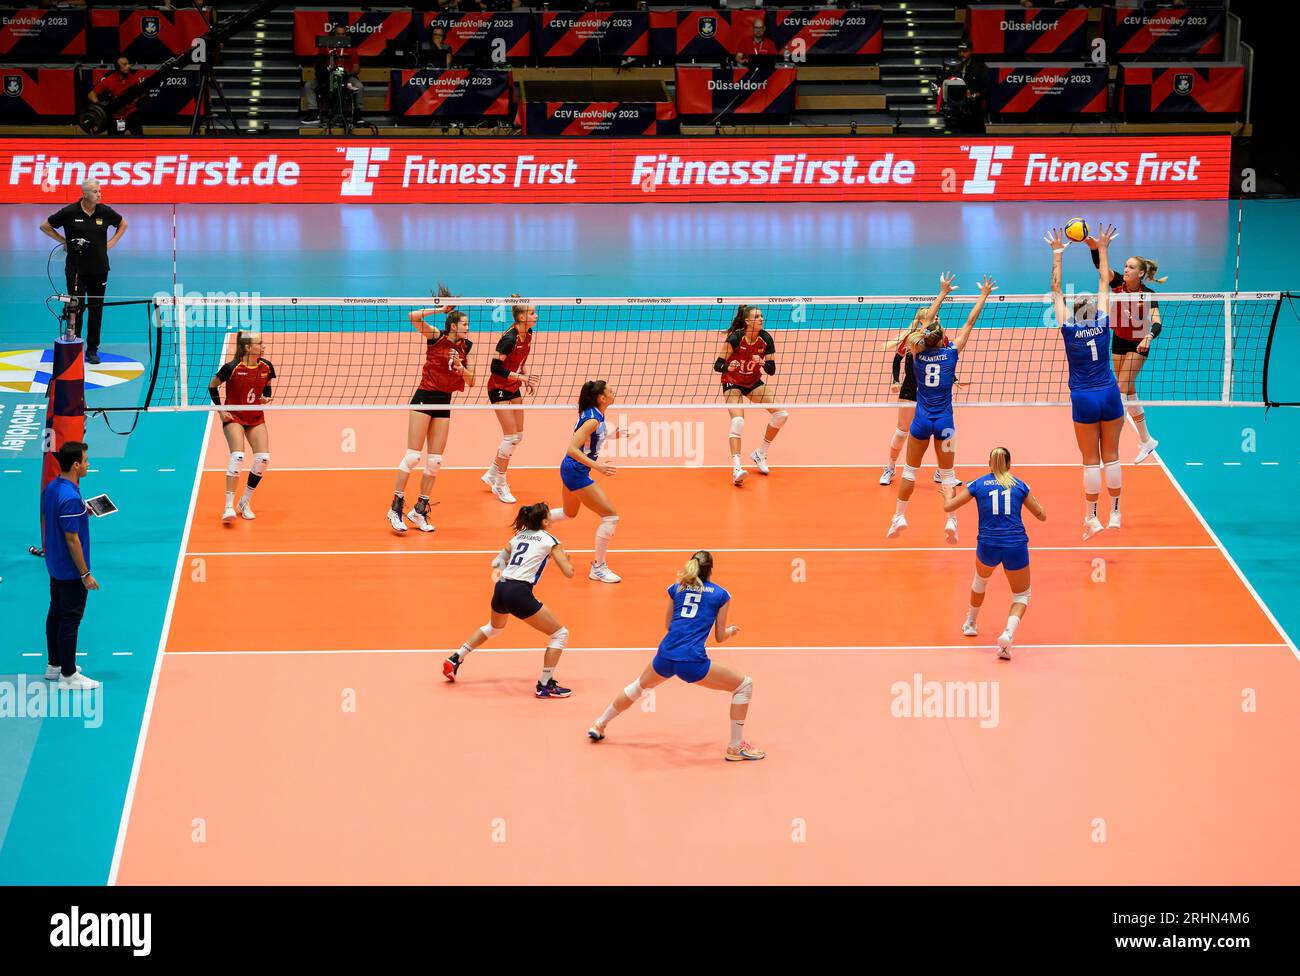 Dusseldorf/ Germany. 17/08/2023, feature, volleyball field, playing field, attack by Germany Lina ALSMEIER r. (GER), Action, left to right Antonia STAUTZ (GER), Marie SCHOELZEL (Scholzel)(GER), Pia KAESTNER (Kastner)(GER), Lena STIGROT (GER), Lina ALSMEIER (GER), Greece (GRE) - Germany GER) 0:3, on August 17th, 2023 Volleyball European Championship for Women, from August 15th - 03.09.2023 in Dusseldorf/ Germany. Stock Photo